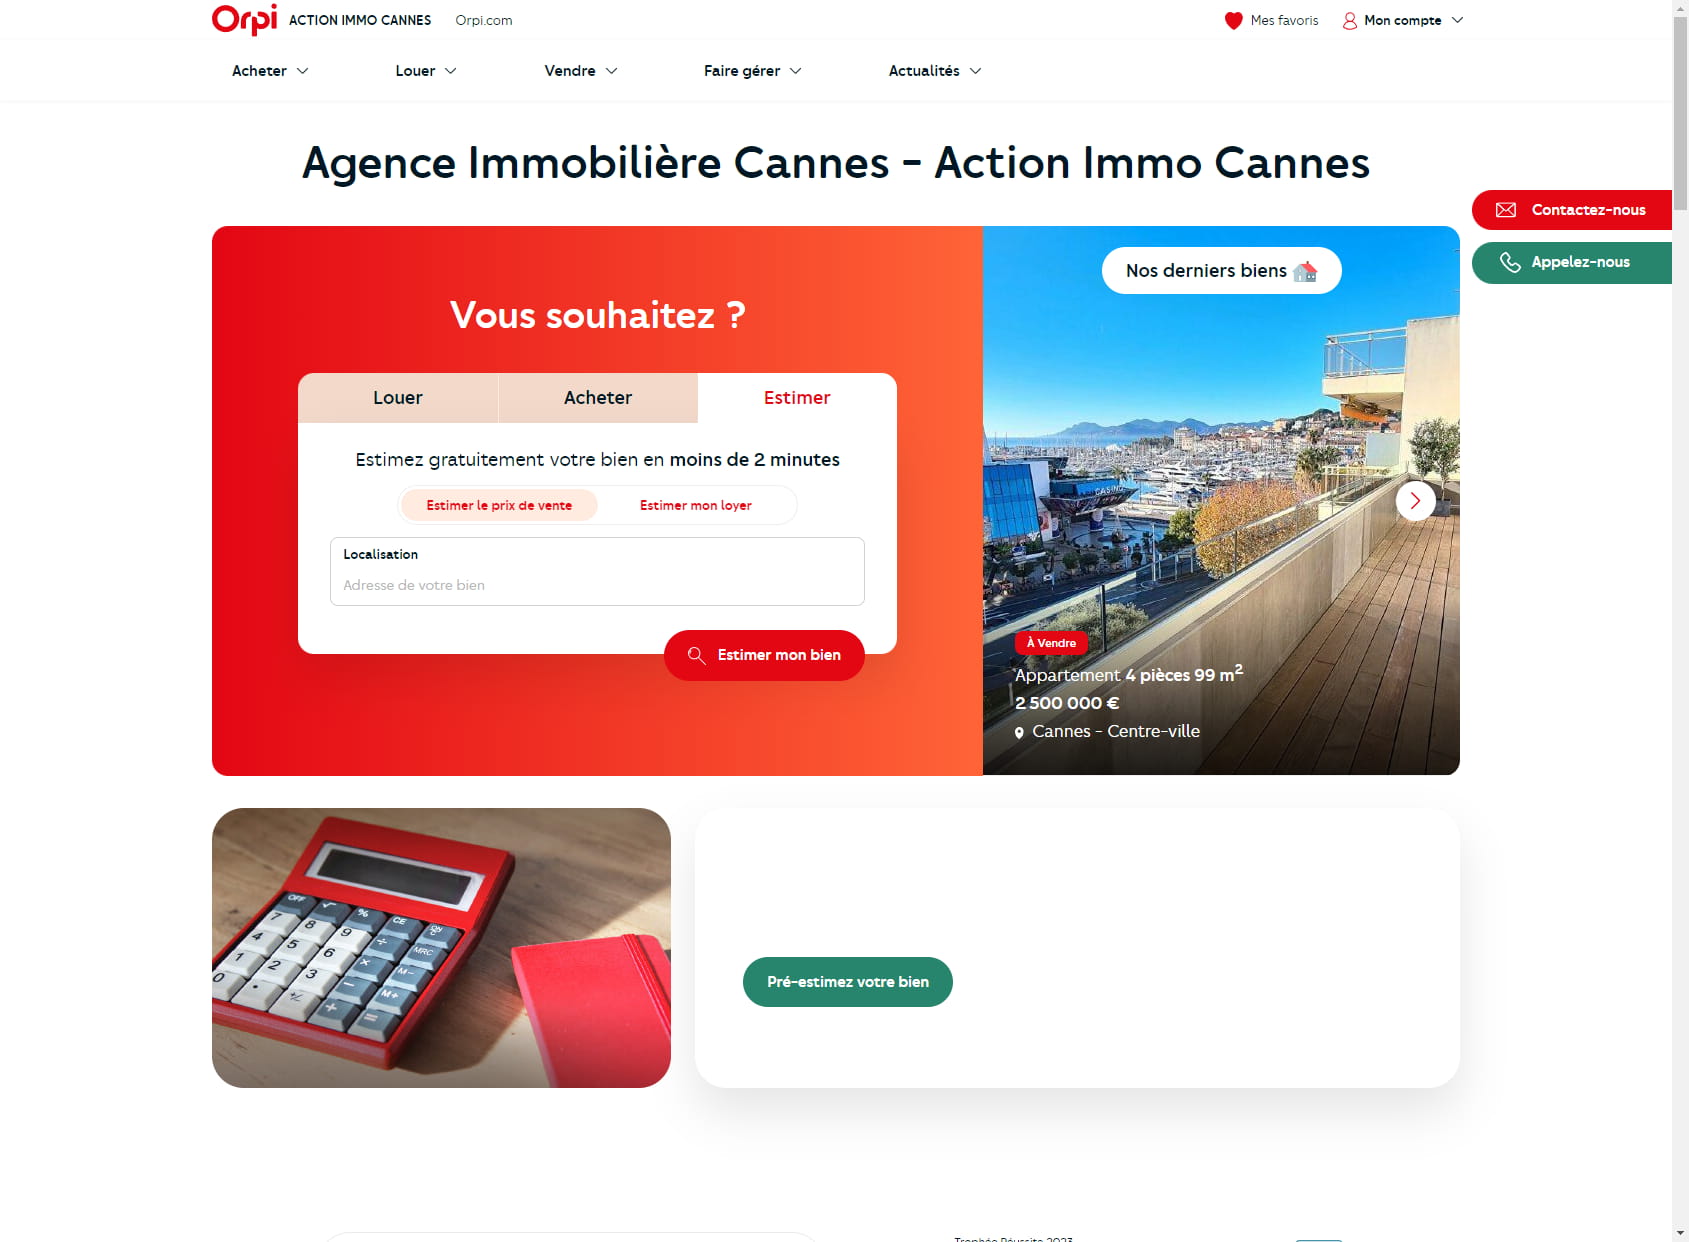 ORPI Action Immobilier Cannes